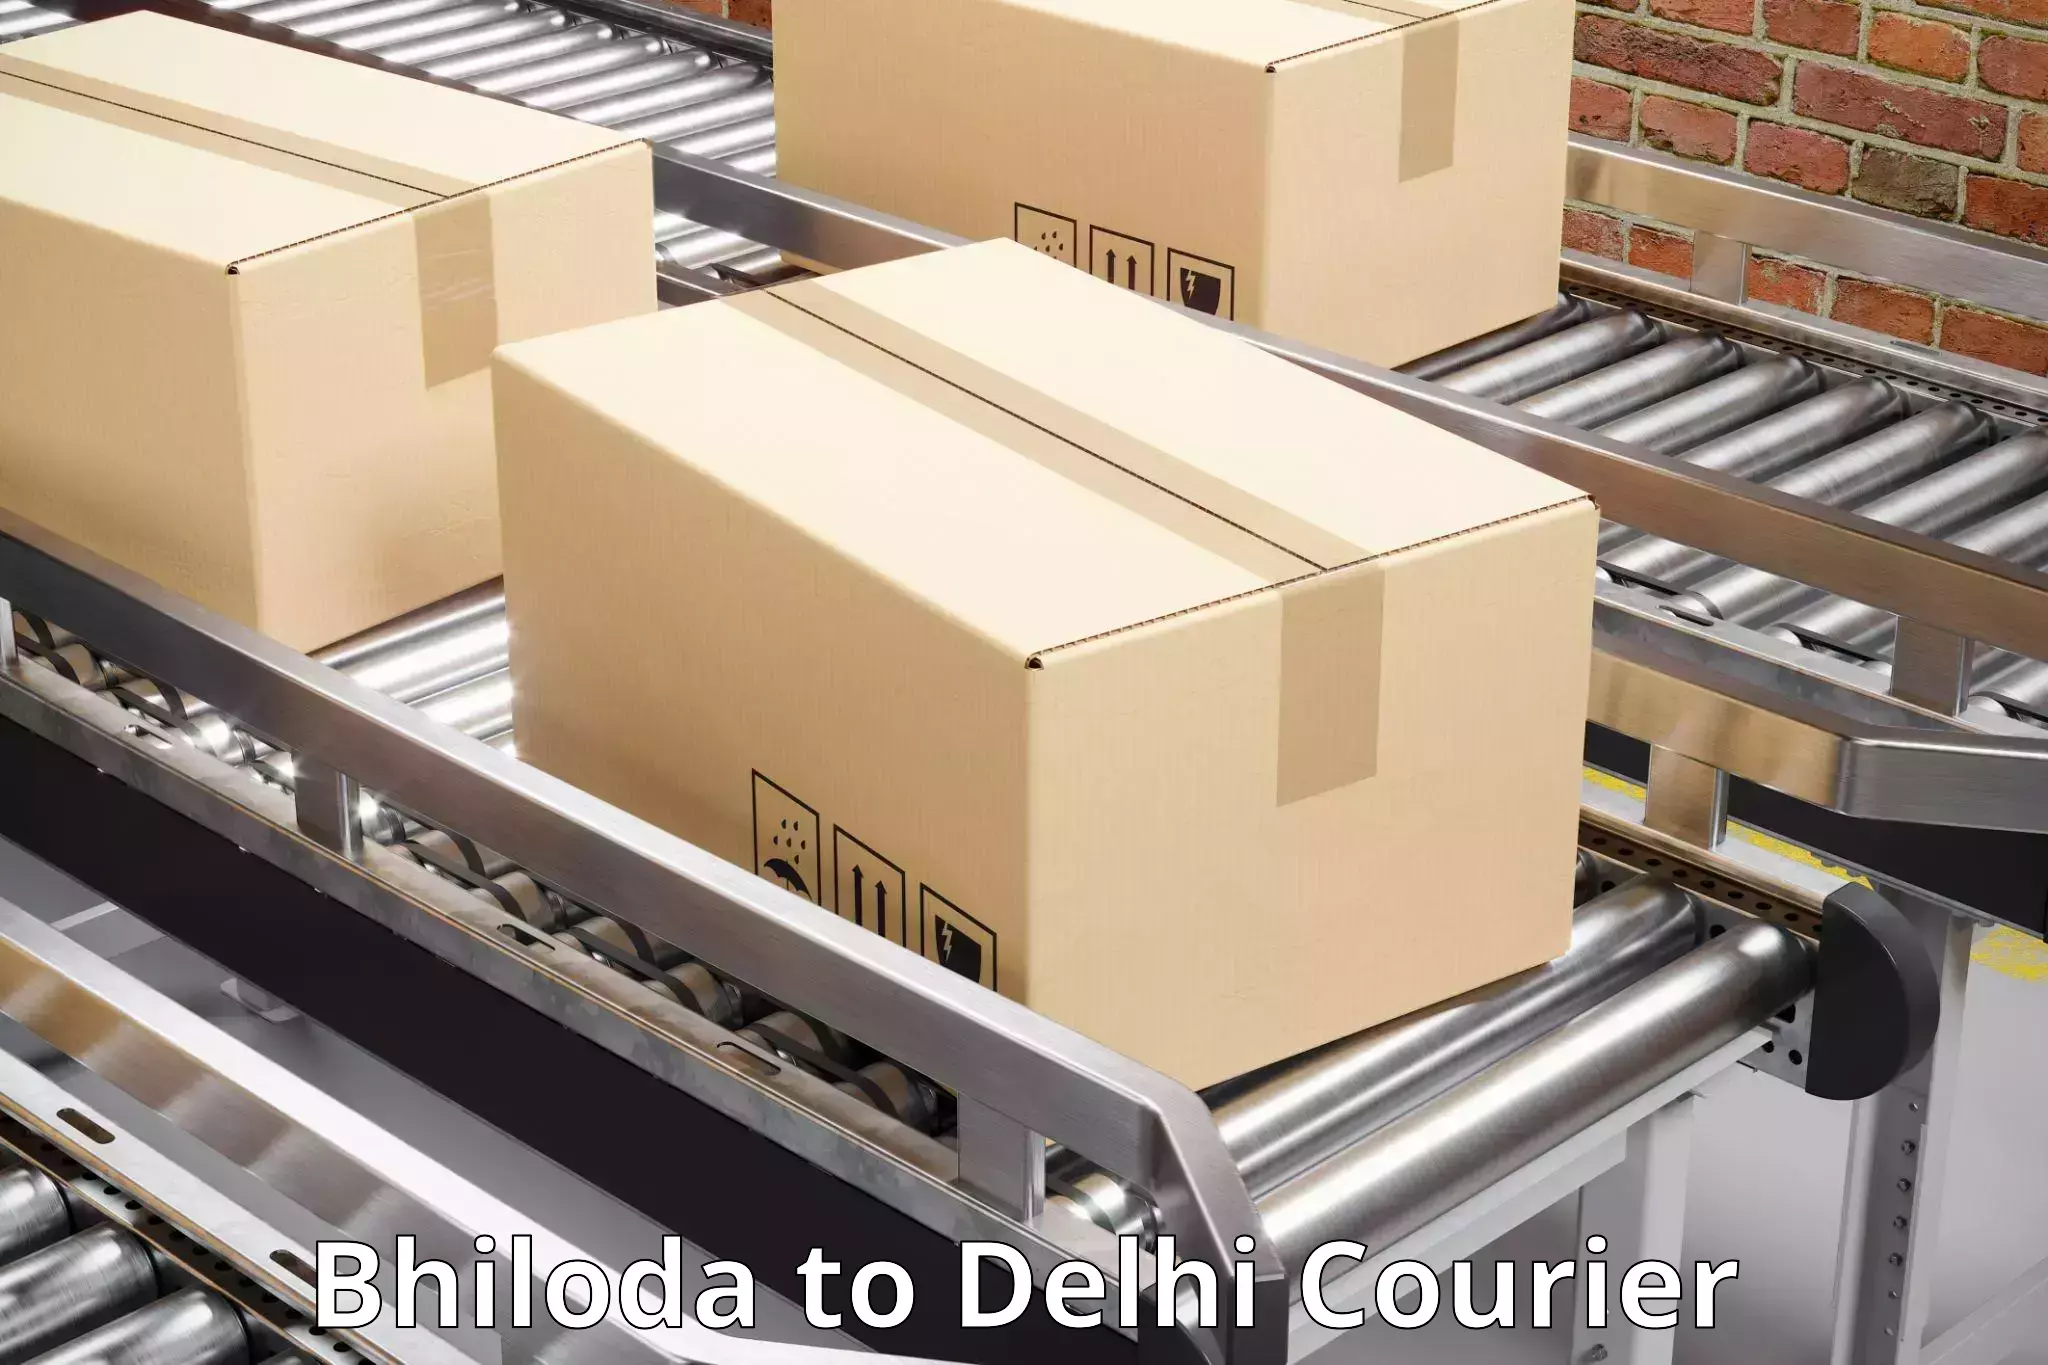 Global shipping networks in Bhiloda to Delhi